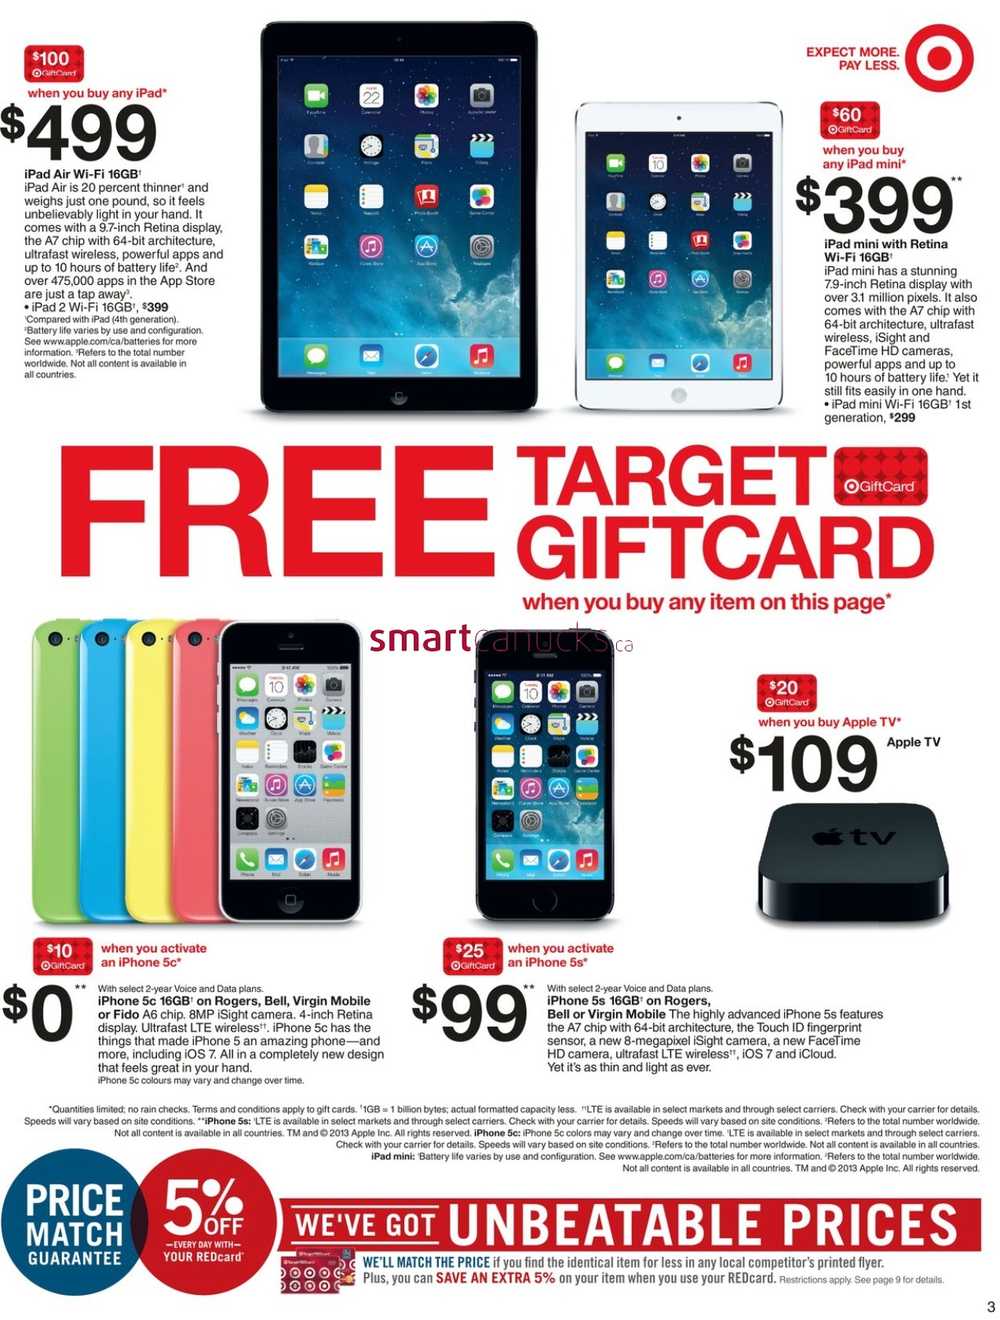 Target Canada Boxing Day  Week Flyer Thursday, December 26 to ...